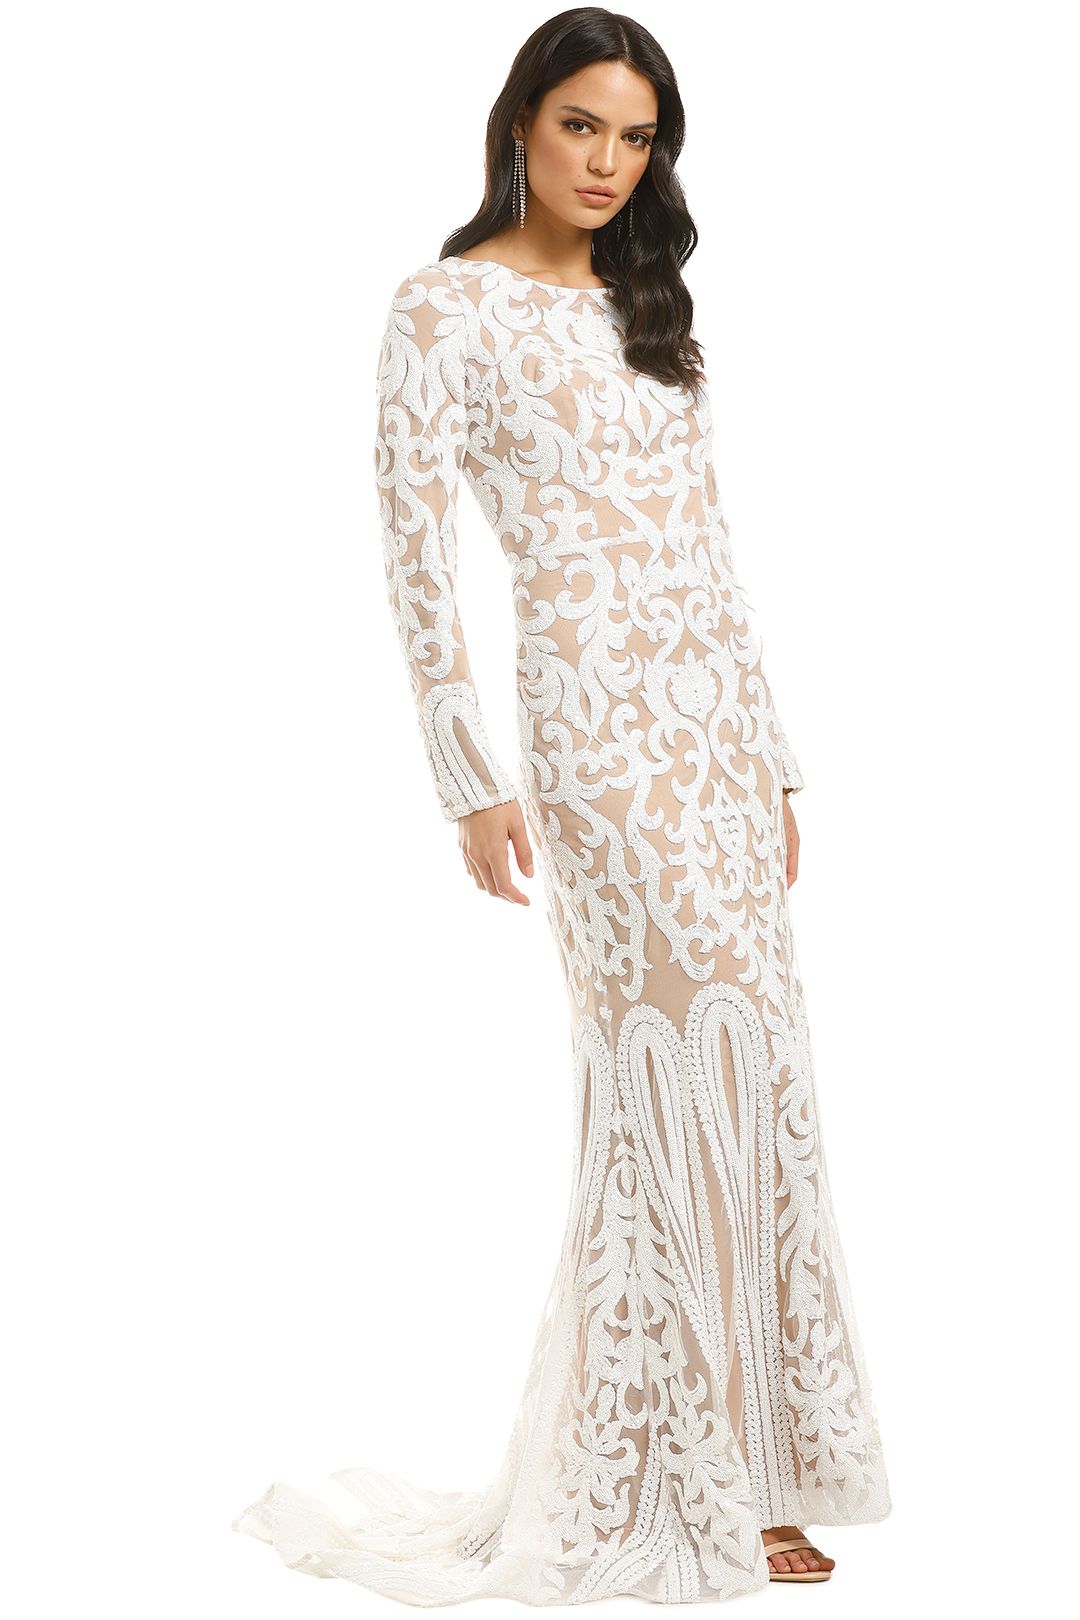 Tinaholy-Scoop-Long-Sleeve-Gown-White-Nude-Side